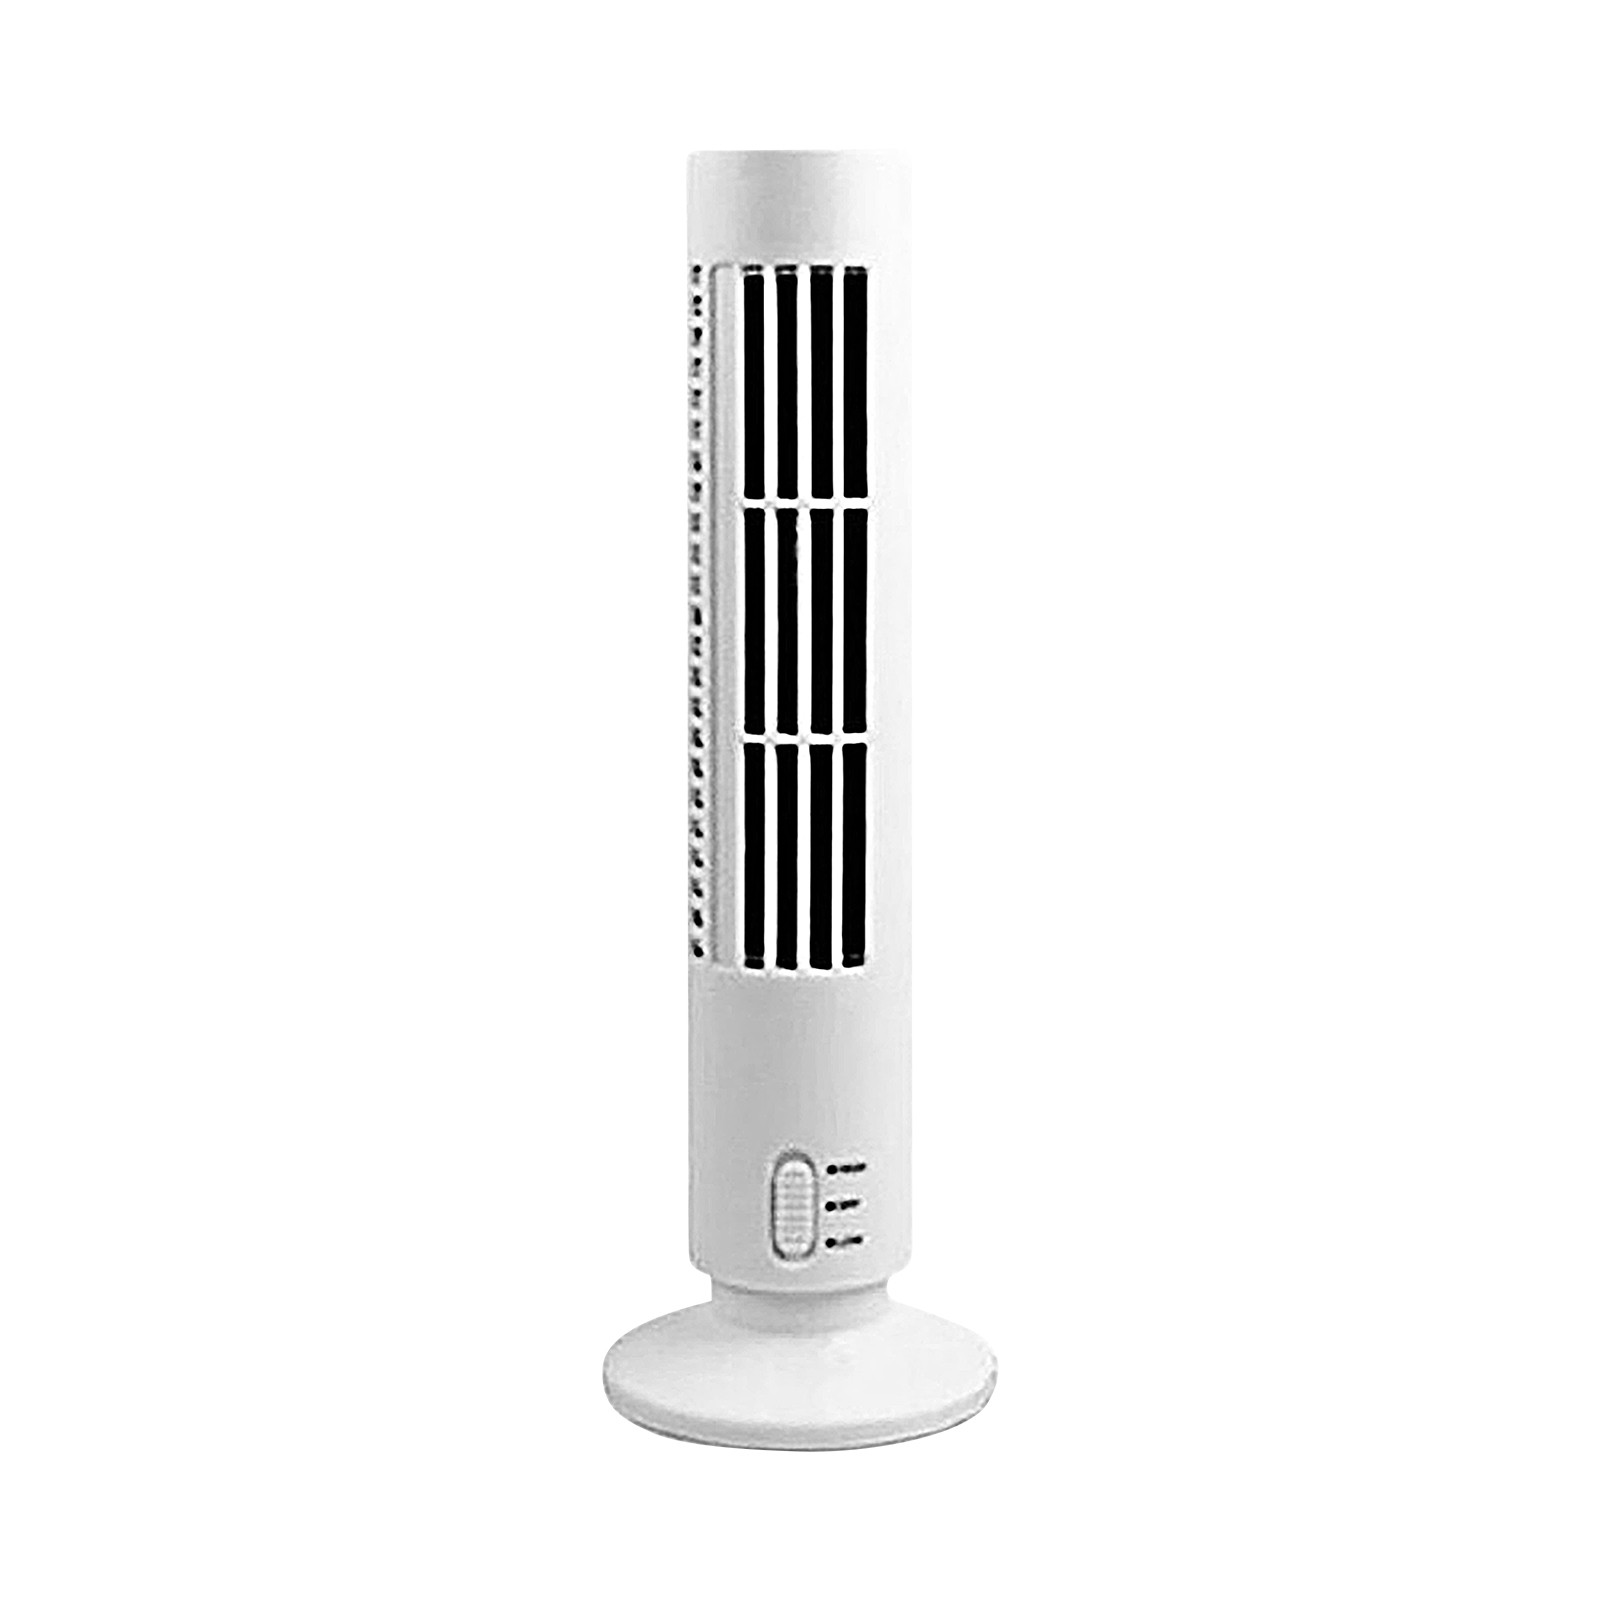 Wovilon Tower Fan for Bedroom, 24ft/s Velocity Quiet Cooling Fan, 90° Oscillating Fans for Indoors, Table Fan, Bladeless Fan, Standing Floor Fans, White - image 1 of 6